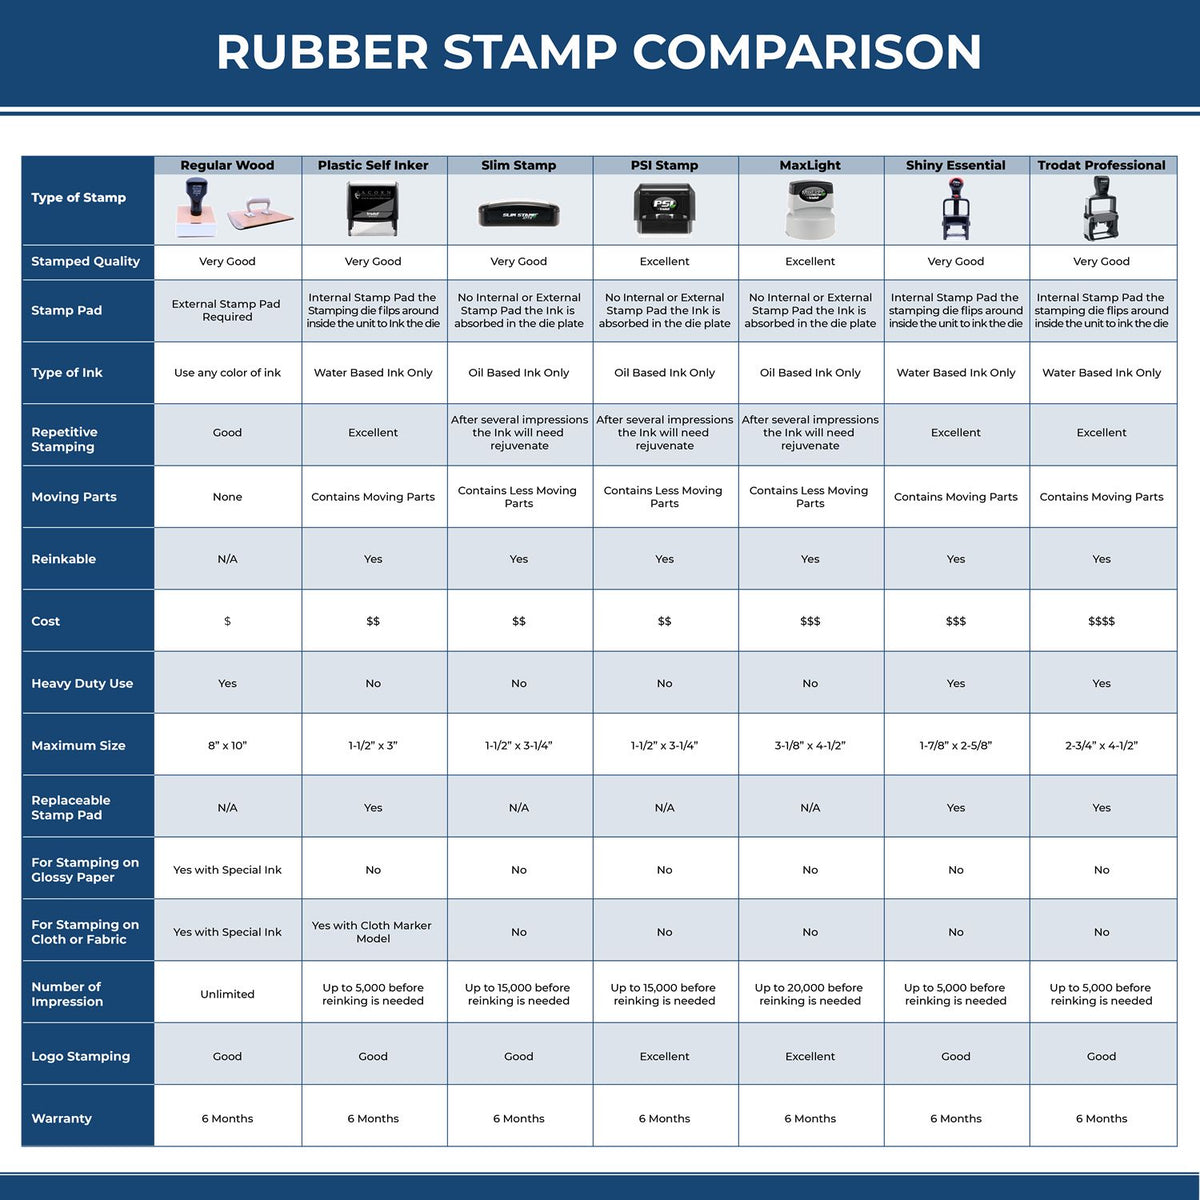 Medical Personnel Only Rubber Stamp 4478R Rubber Stamp Comparison